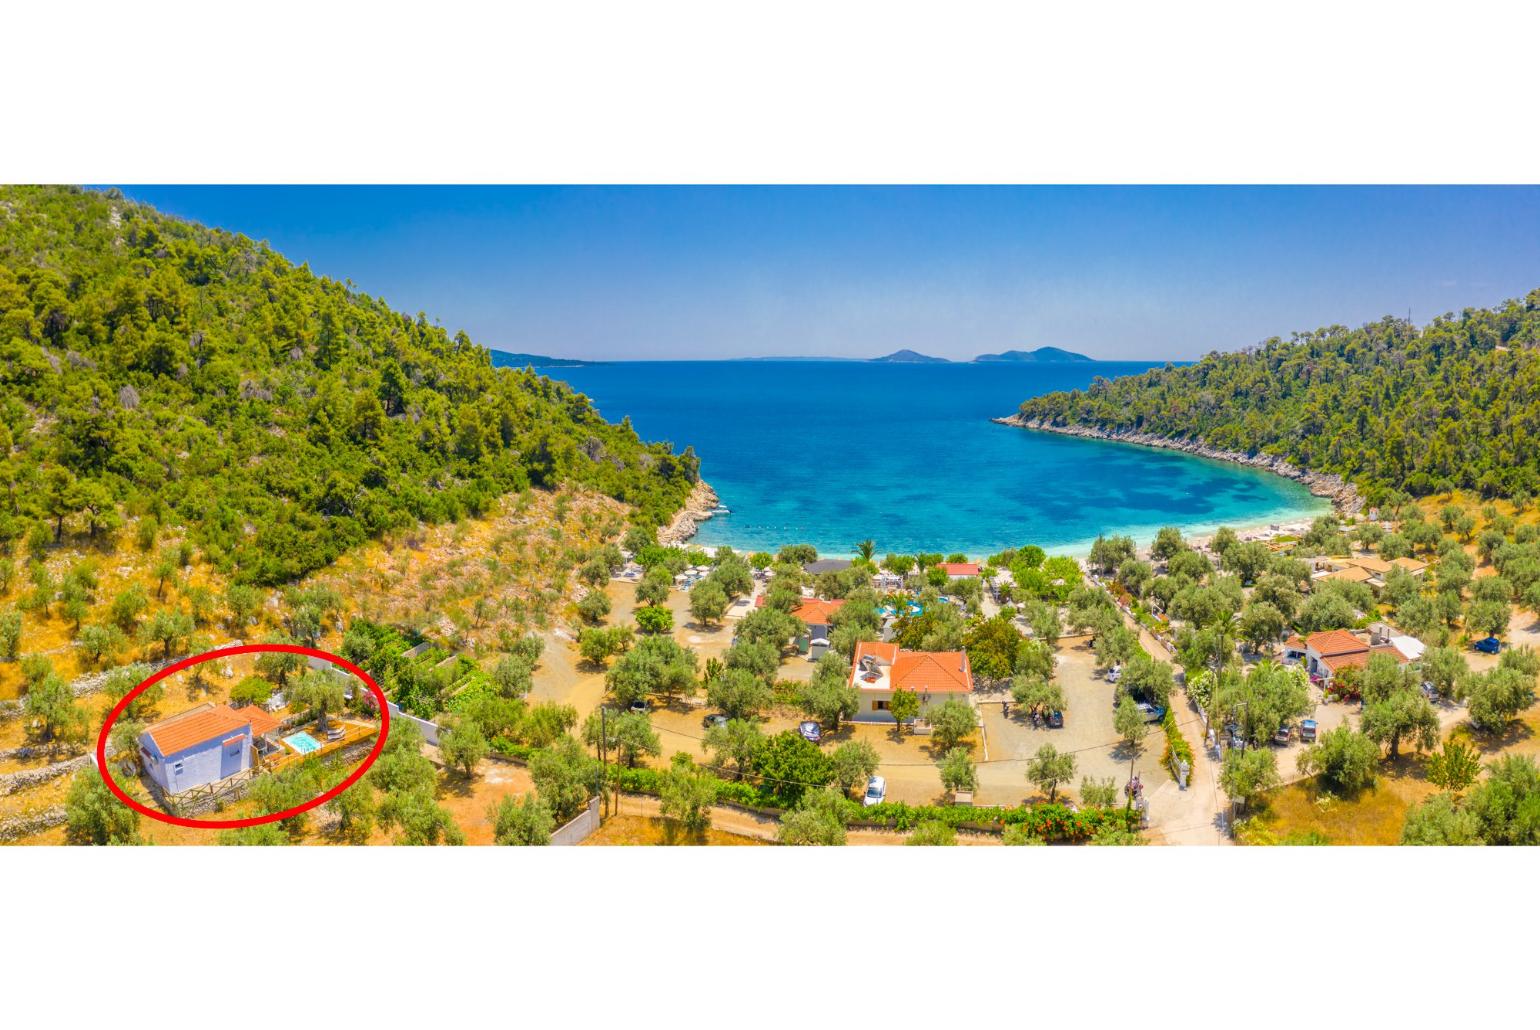 Aerial view of Leftos Gialos Beach showing location of Neptune